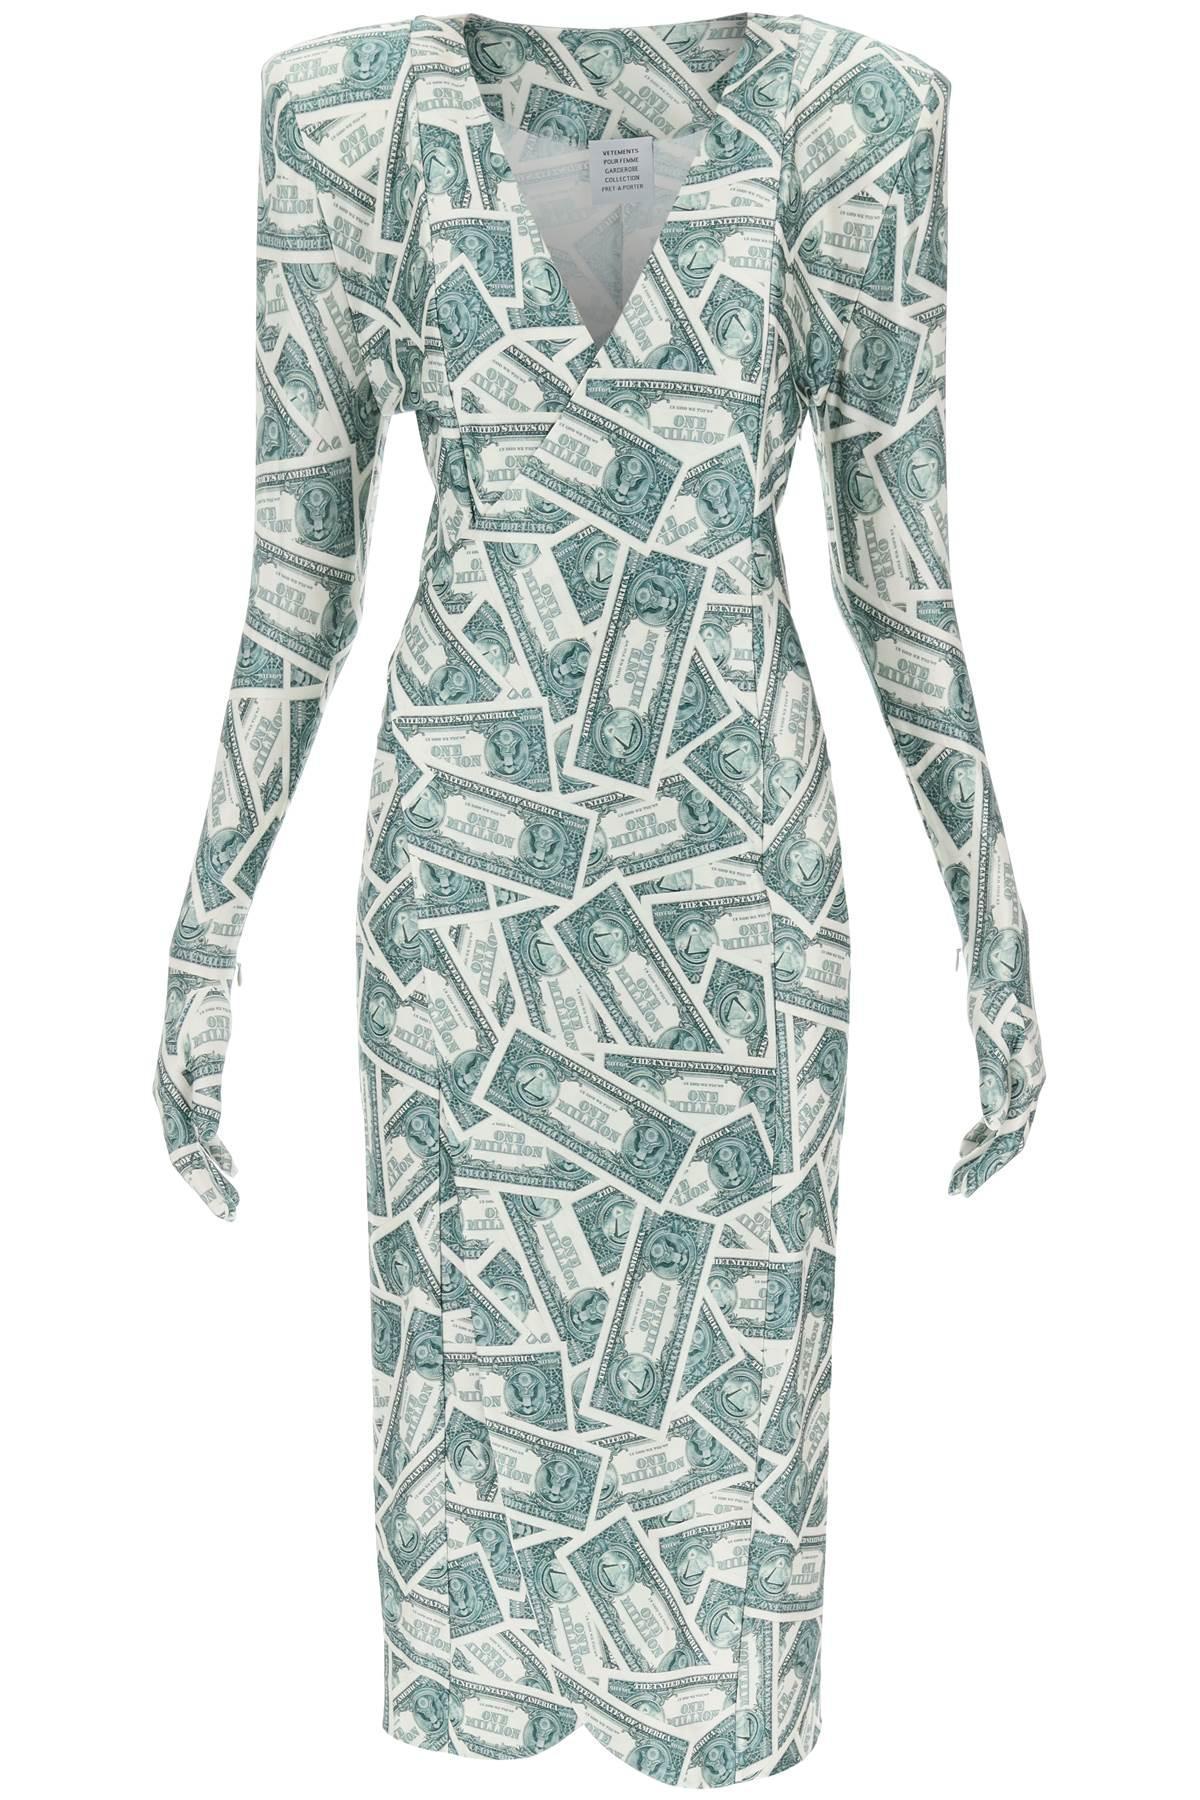 Vetements 'dinasty' Long Dress With Million Dollar Print in Green | Lyst